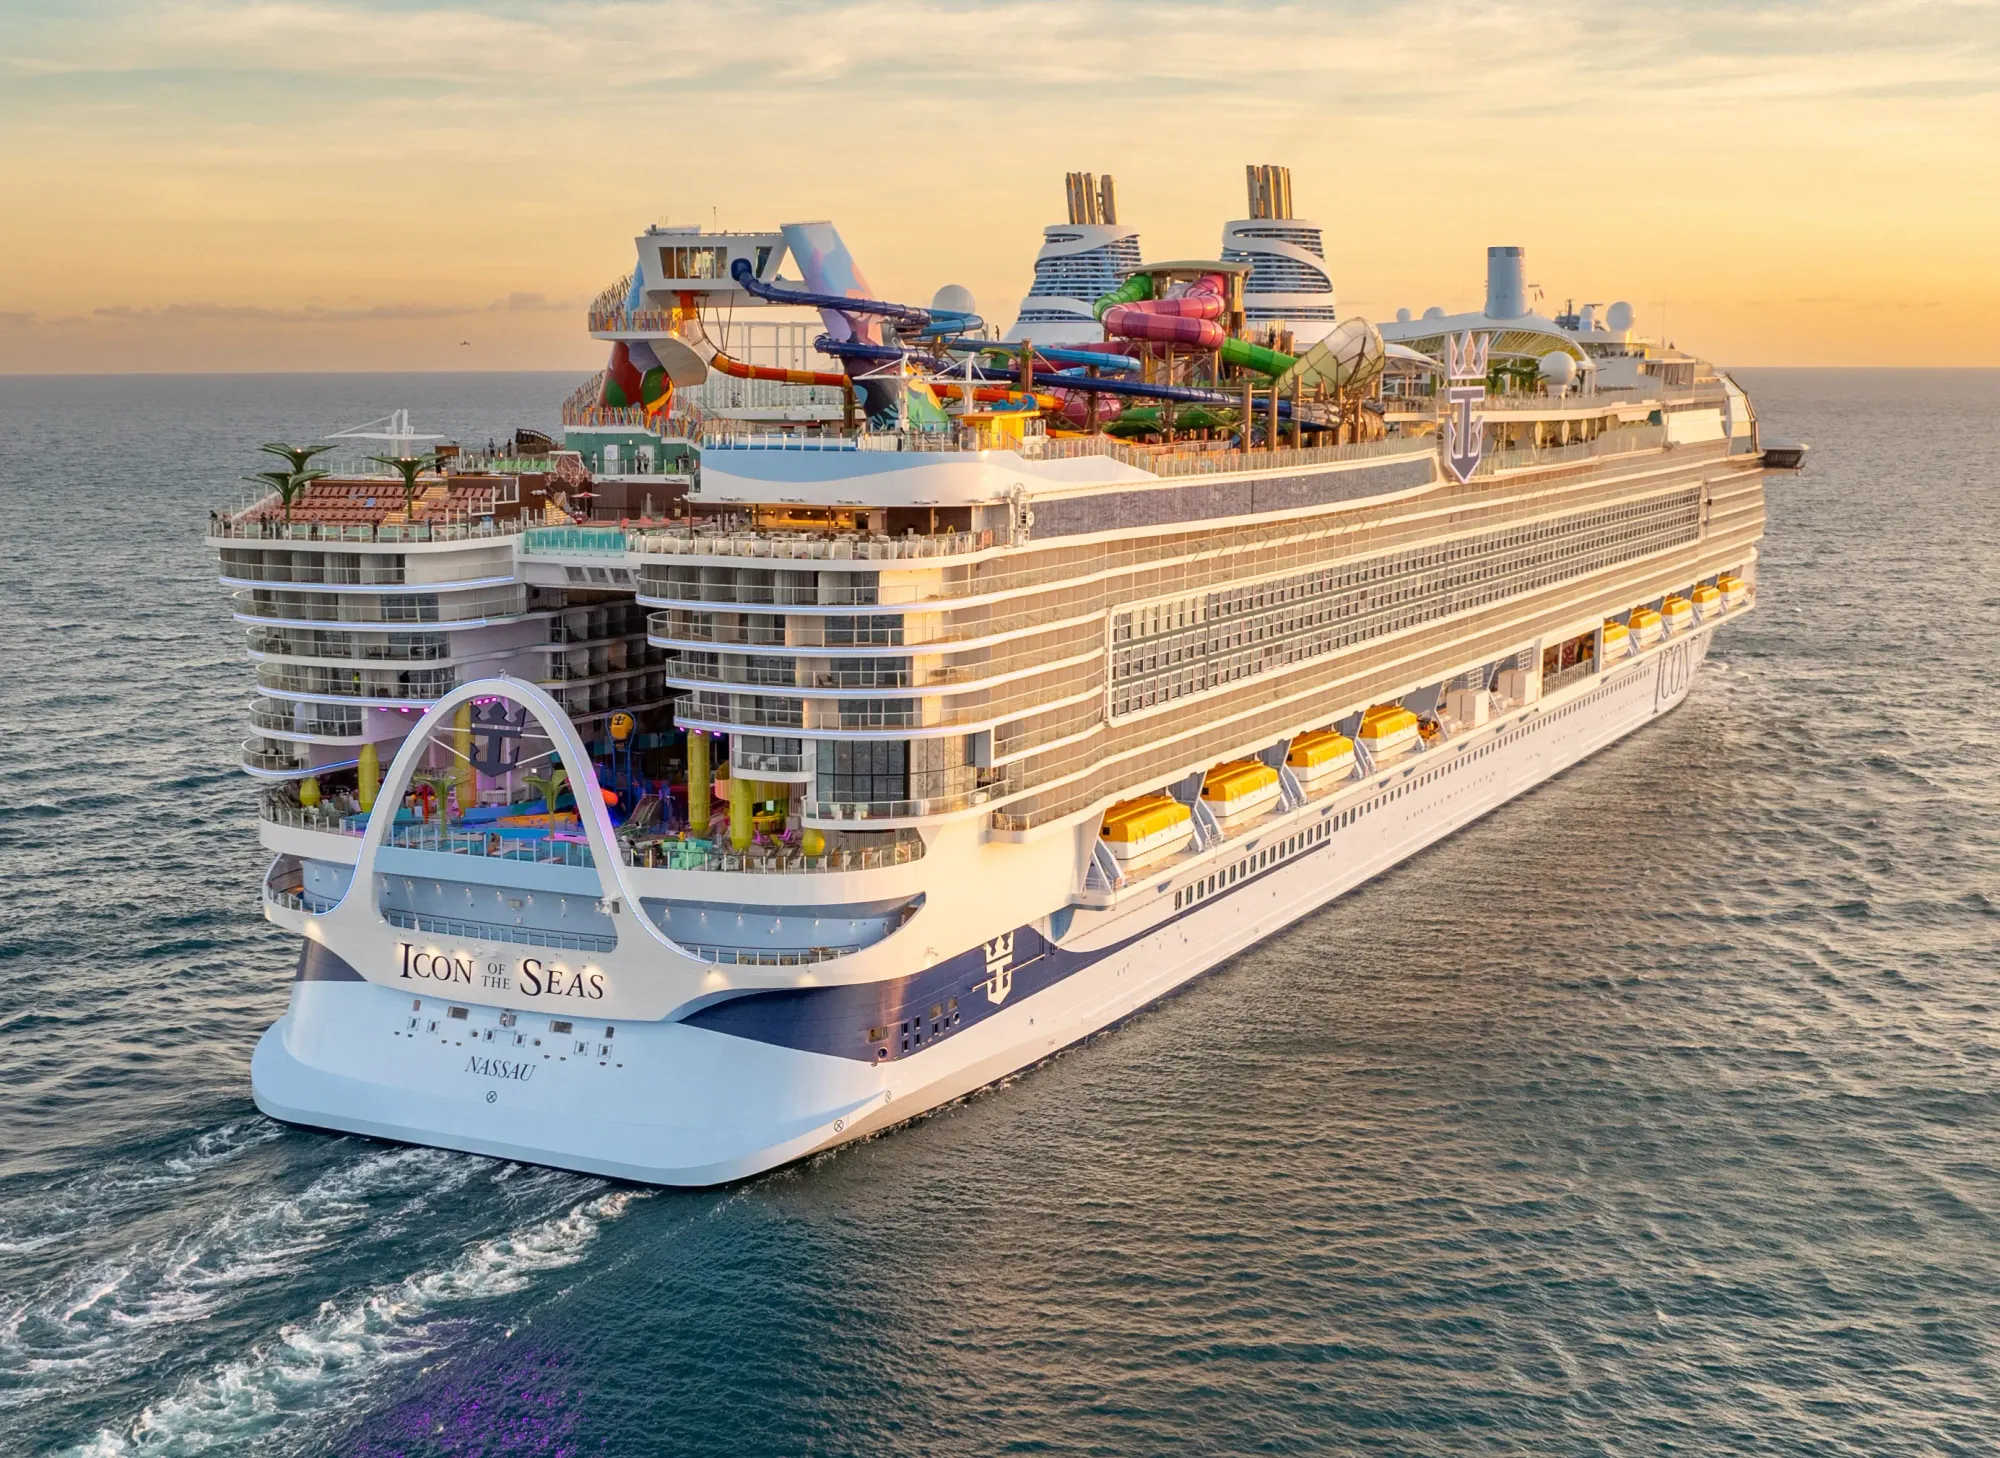 The Top 10 Biggest Cruise Ships in the World